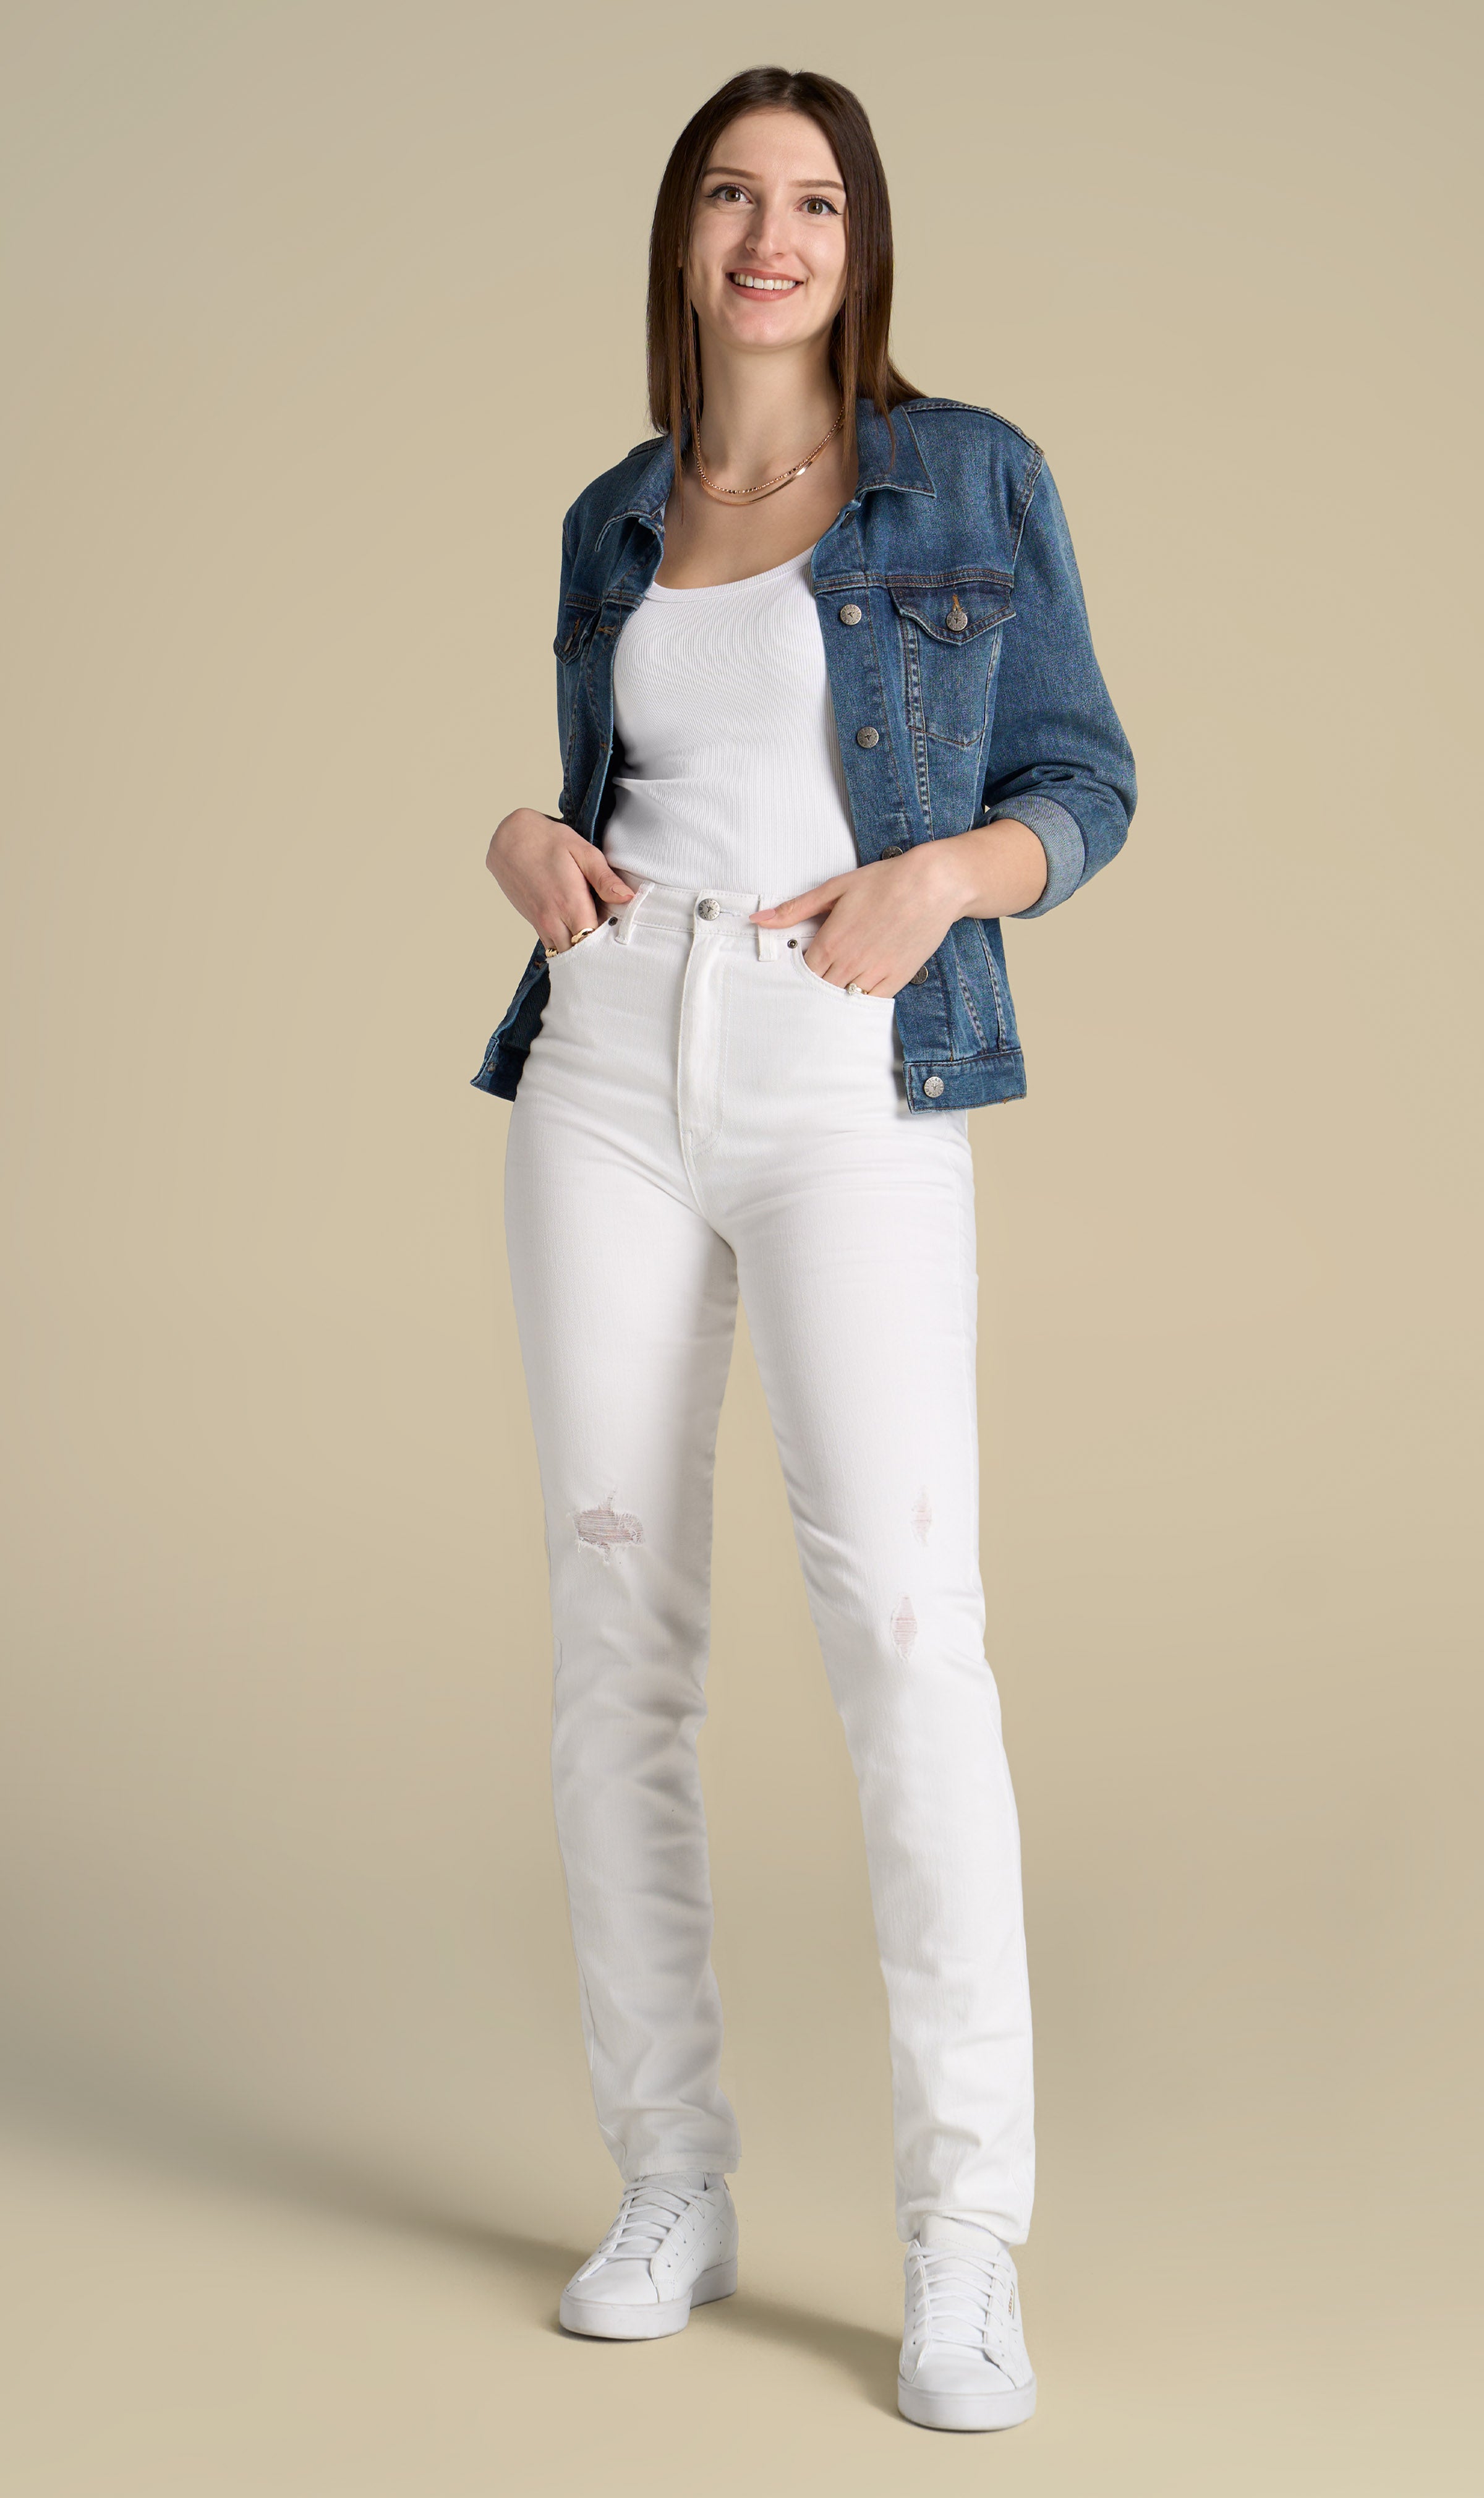 Discover more than 192 white denim jeans womens best